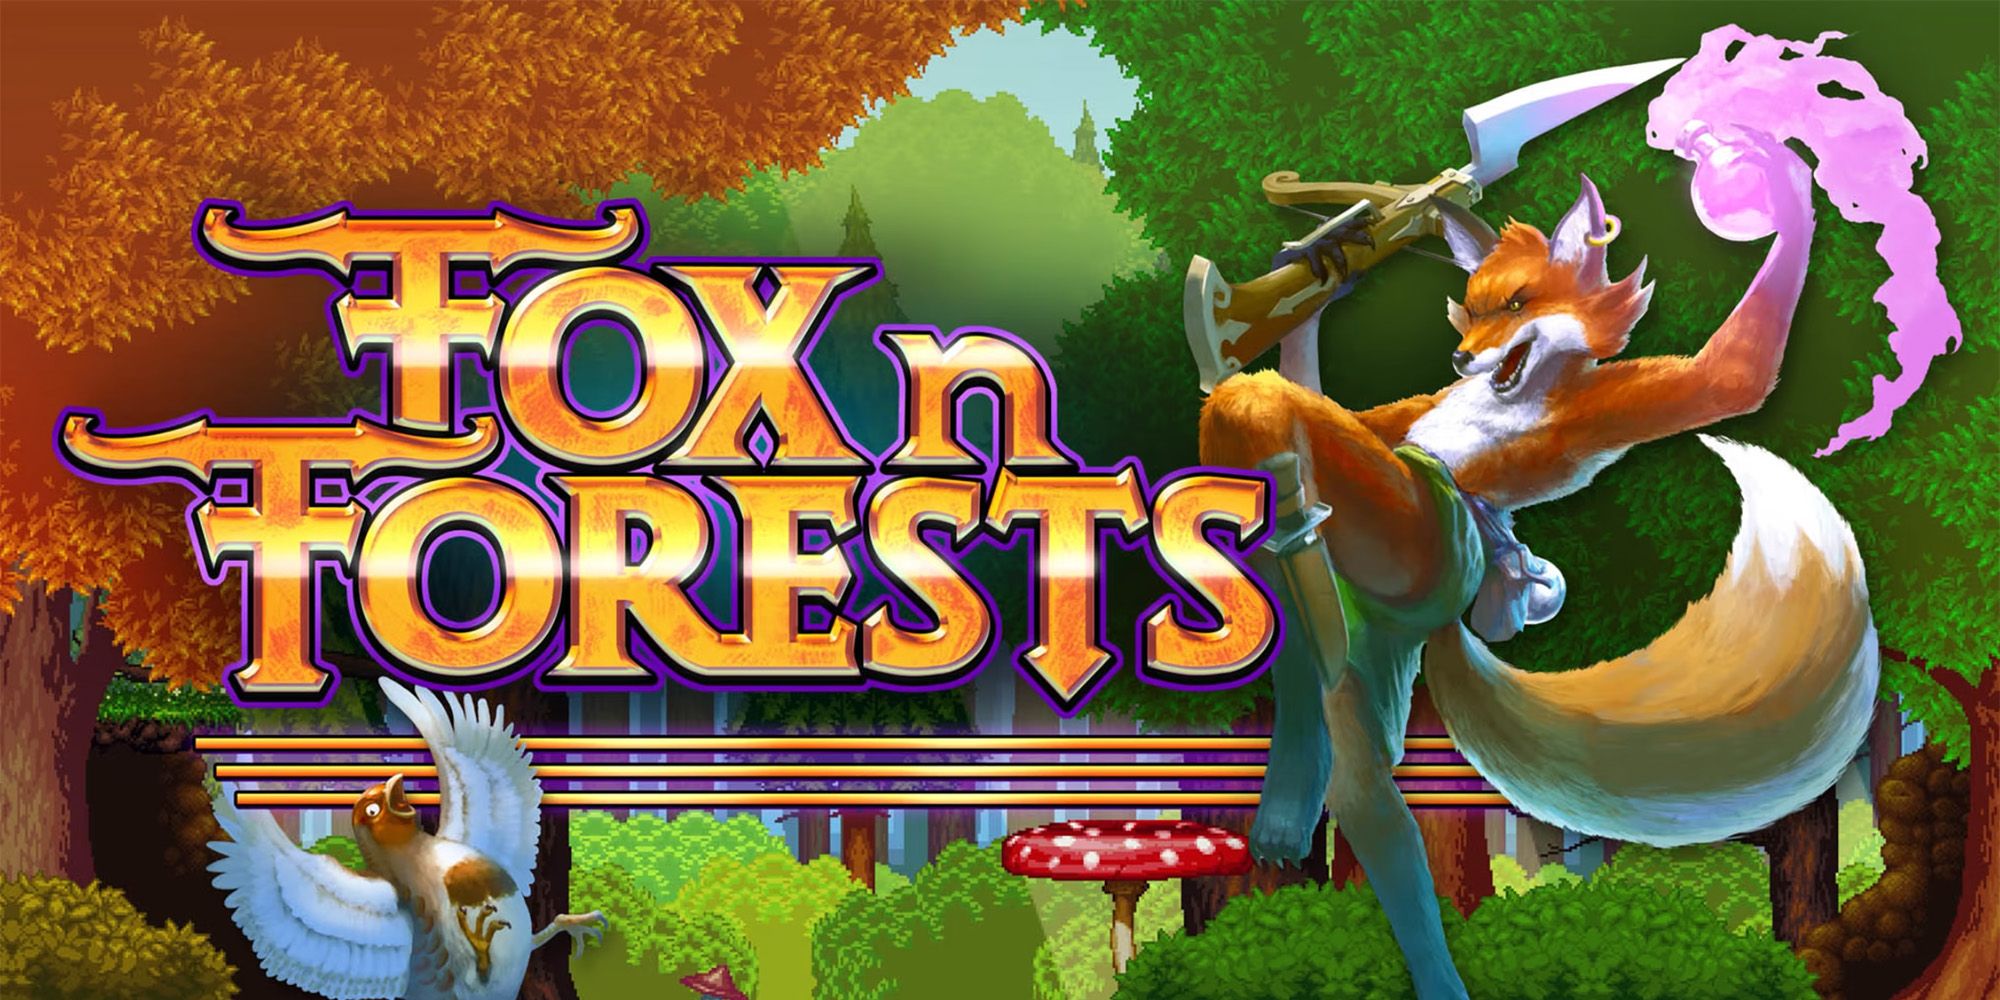 Fox N Forests - A Fox With A Weapon And A Pink Potion In A Forest With A Surprised-Looking Bird